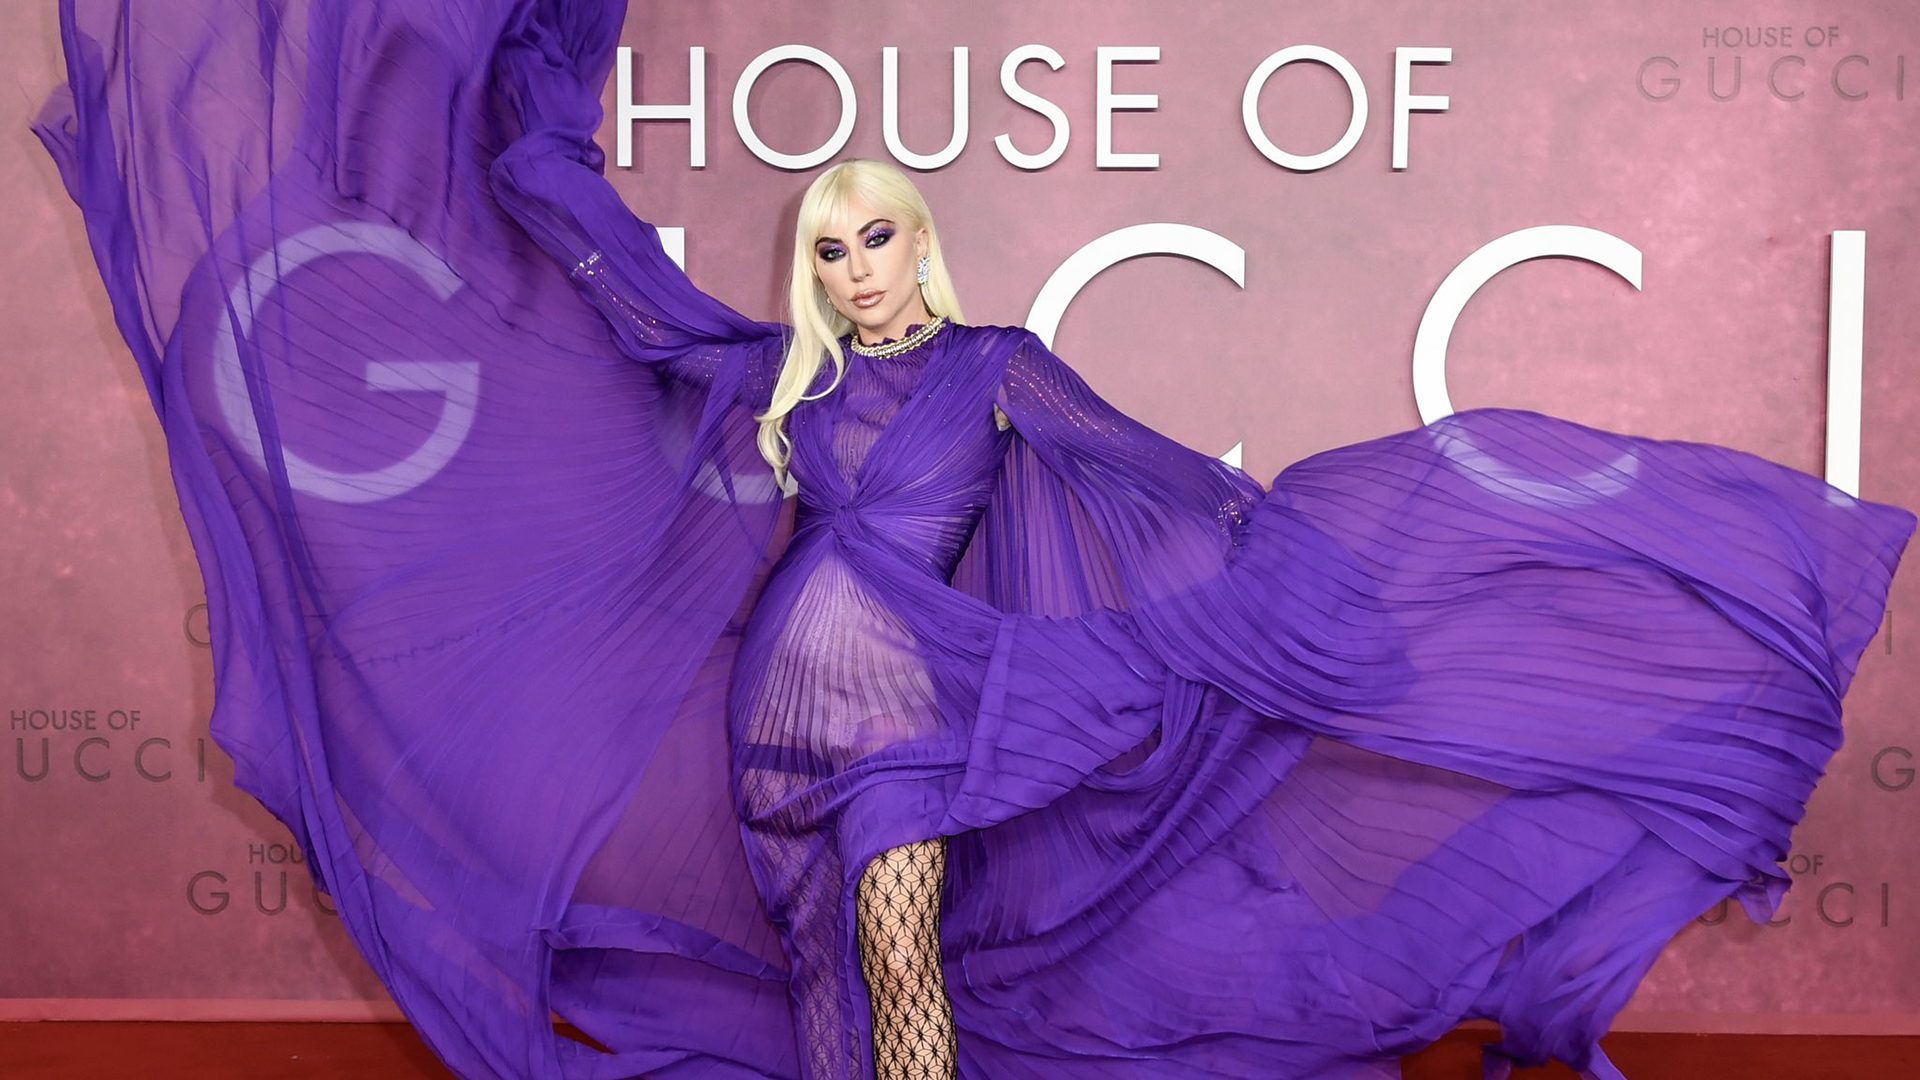 Lady Gaga at the London premiere of House of Gucci